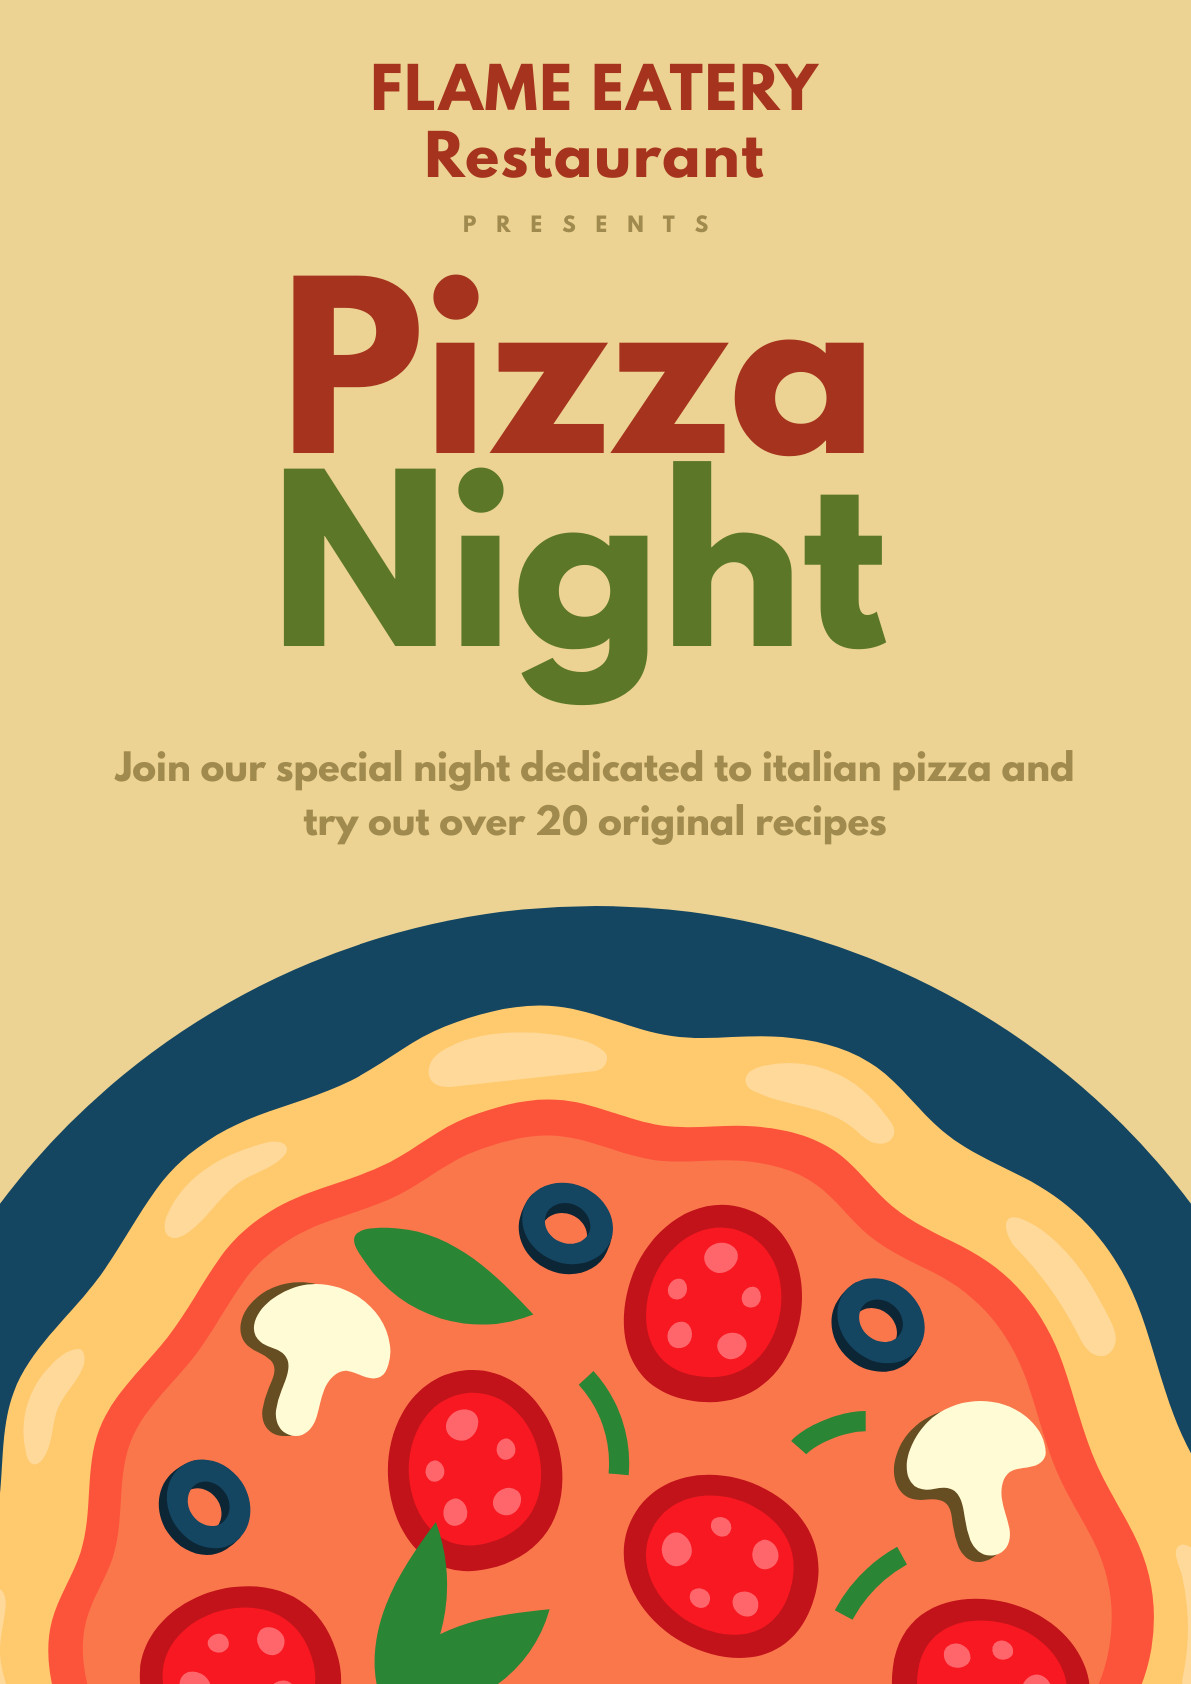 Flame Eatery Pizza Night – Poster Template 1191x1684